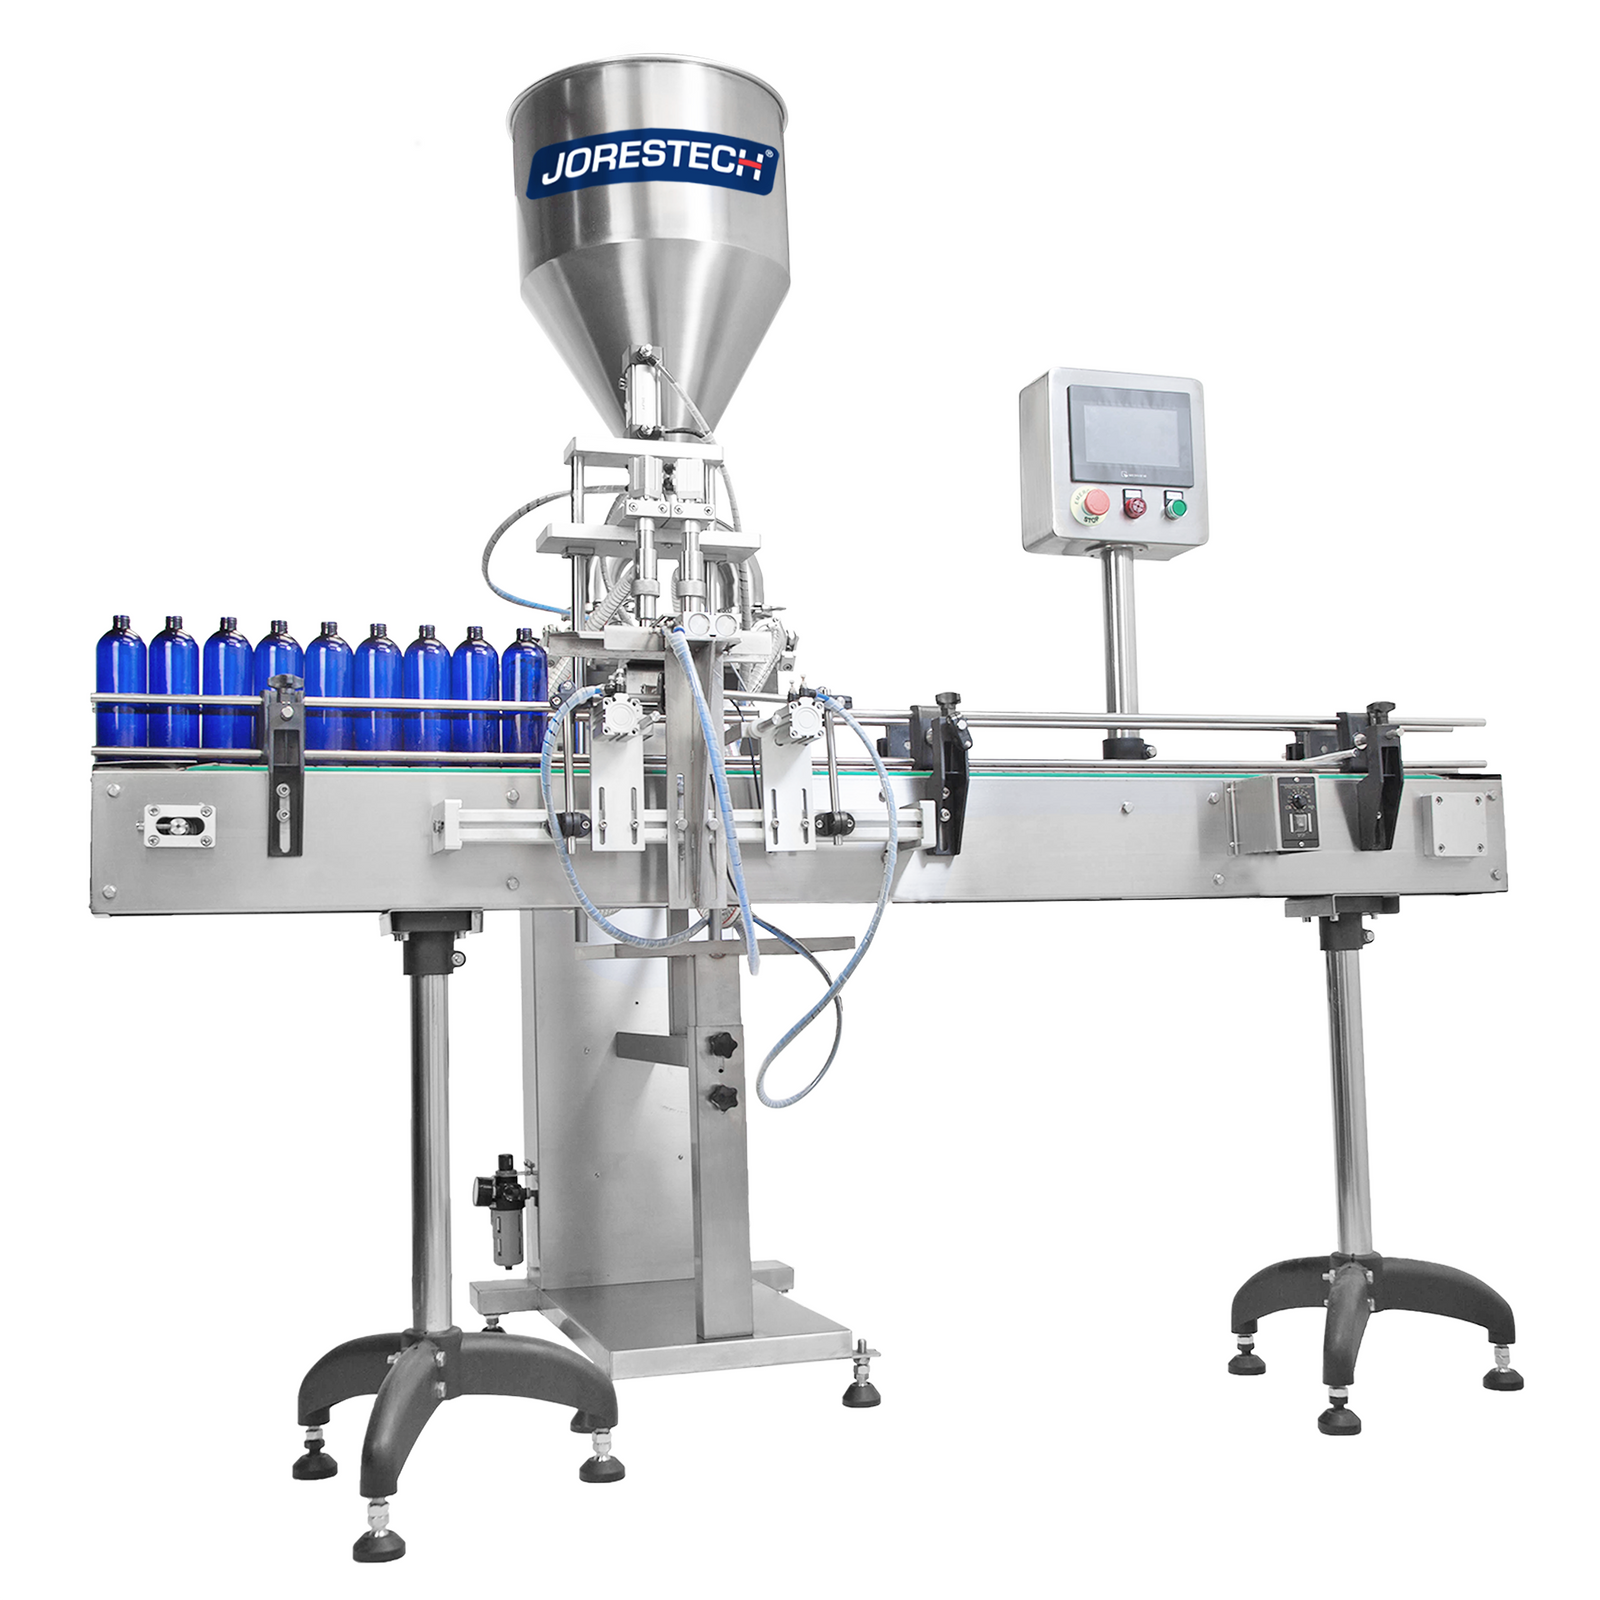 Stainless steel automatic dual head high viscosity paste filling system by JORES TECHNOLOGIES®. It has several blue bottles that are placed on the conveyor being filled by the machine